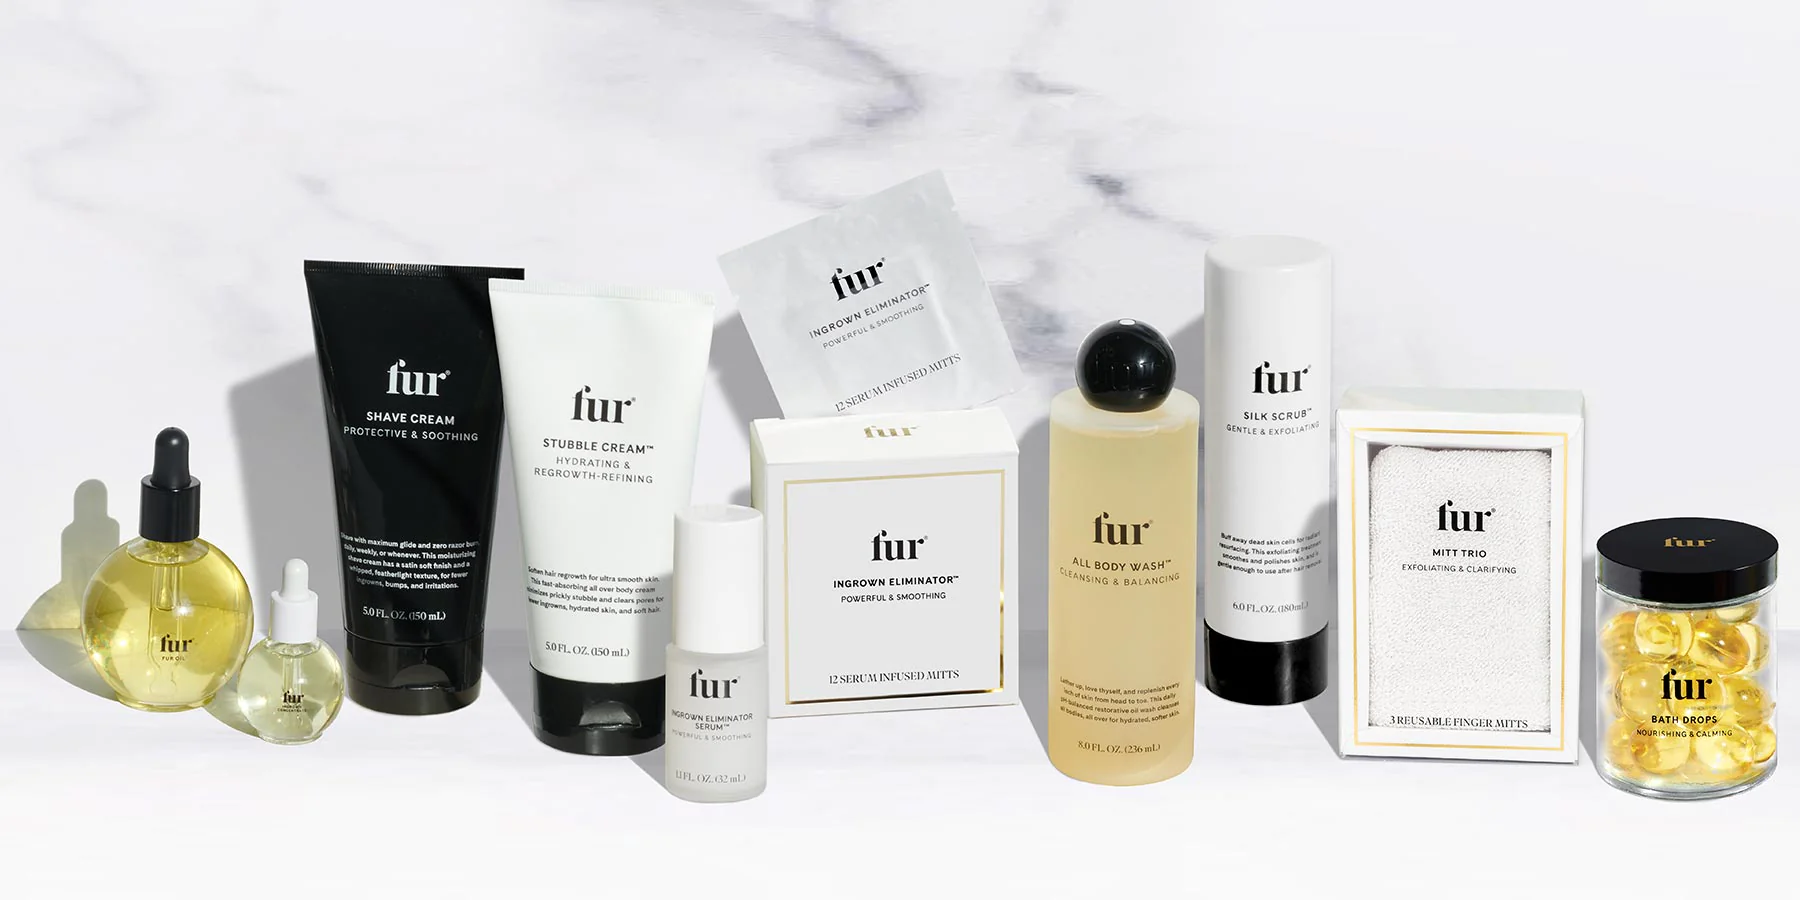 Fur Products